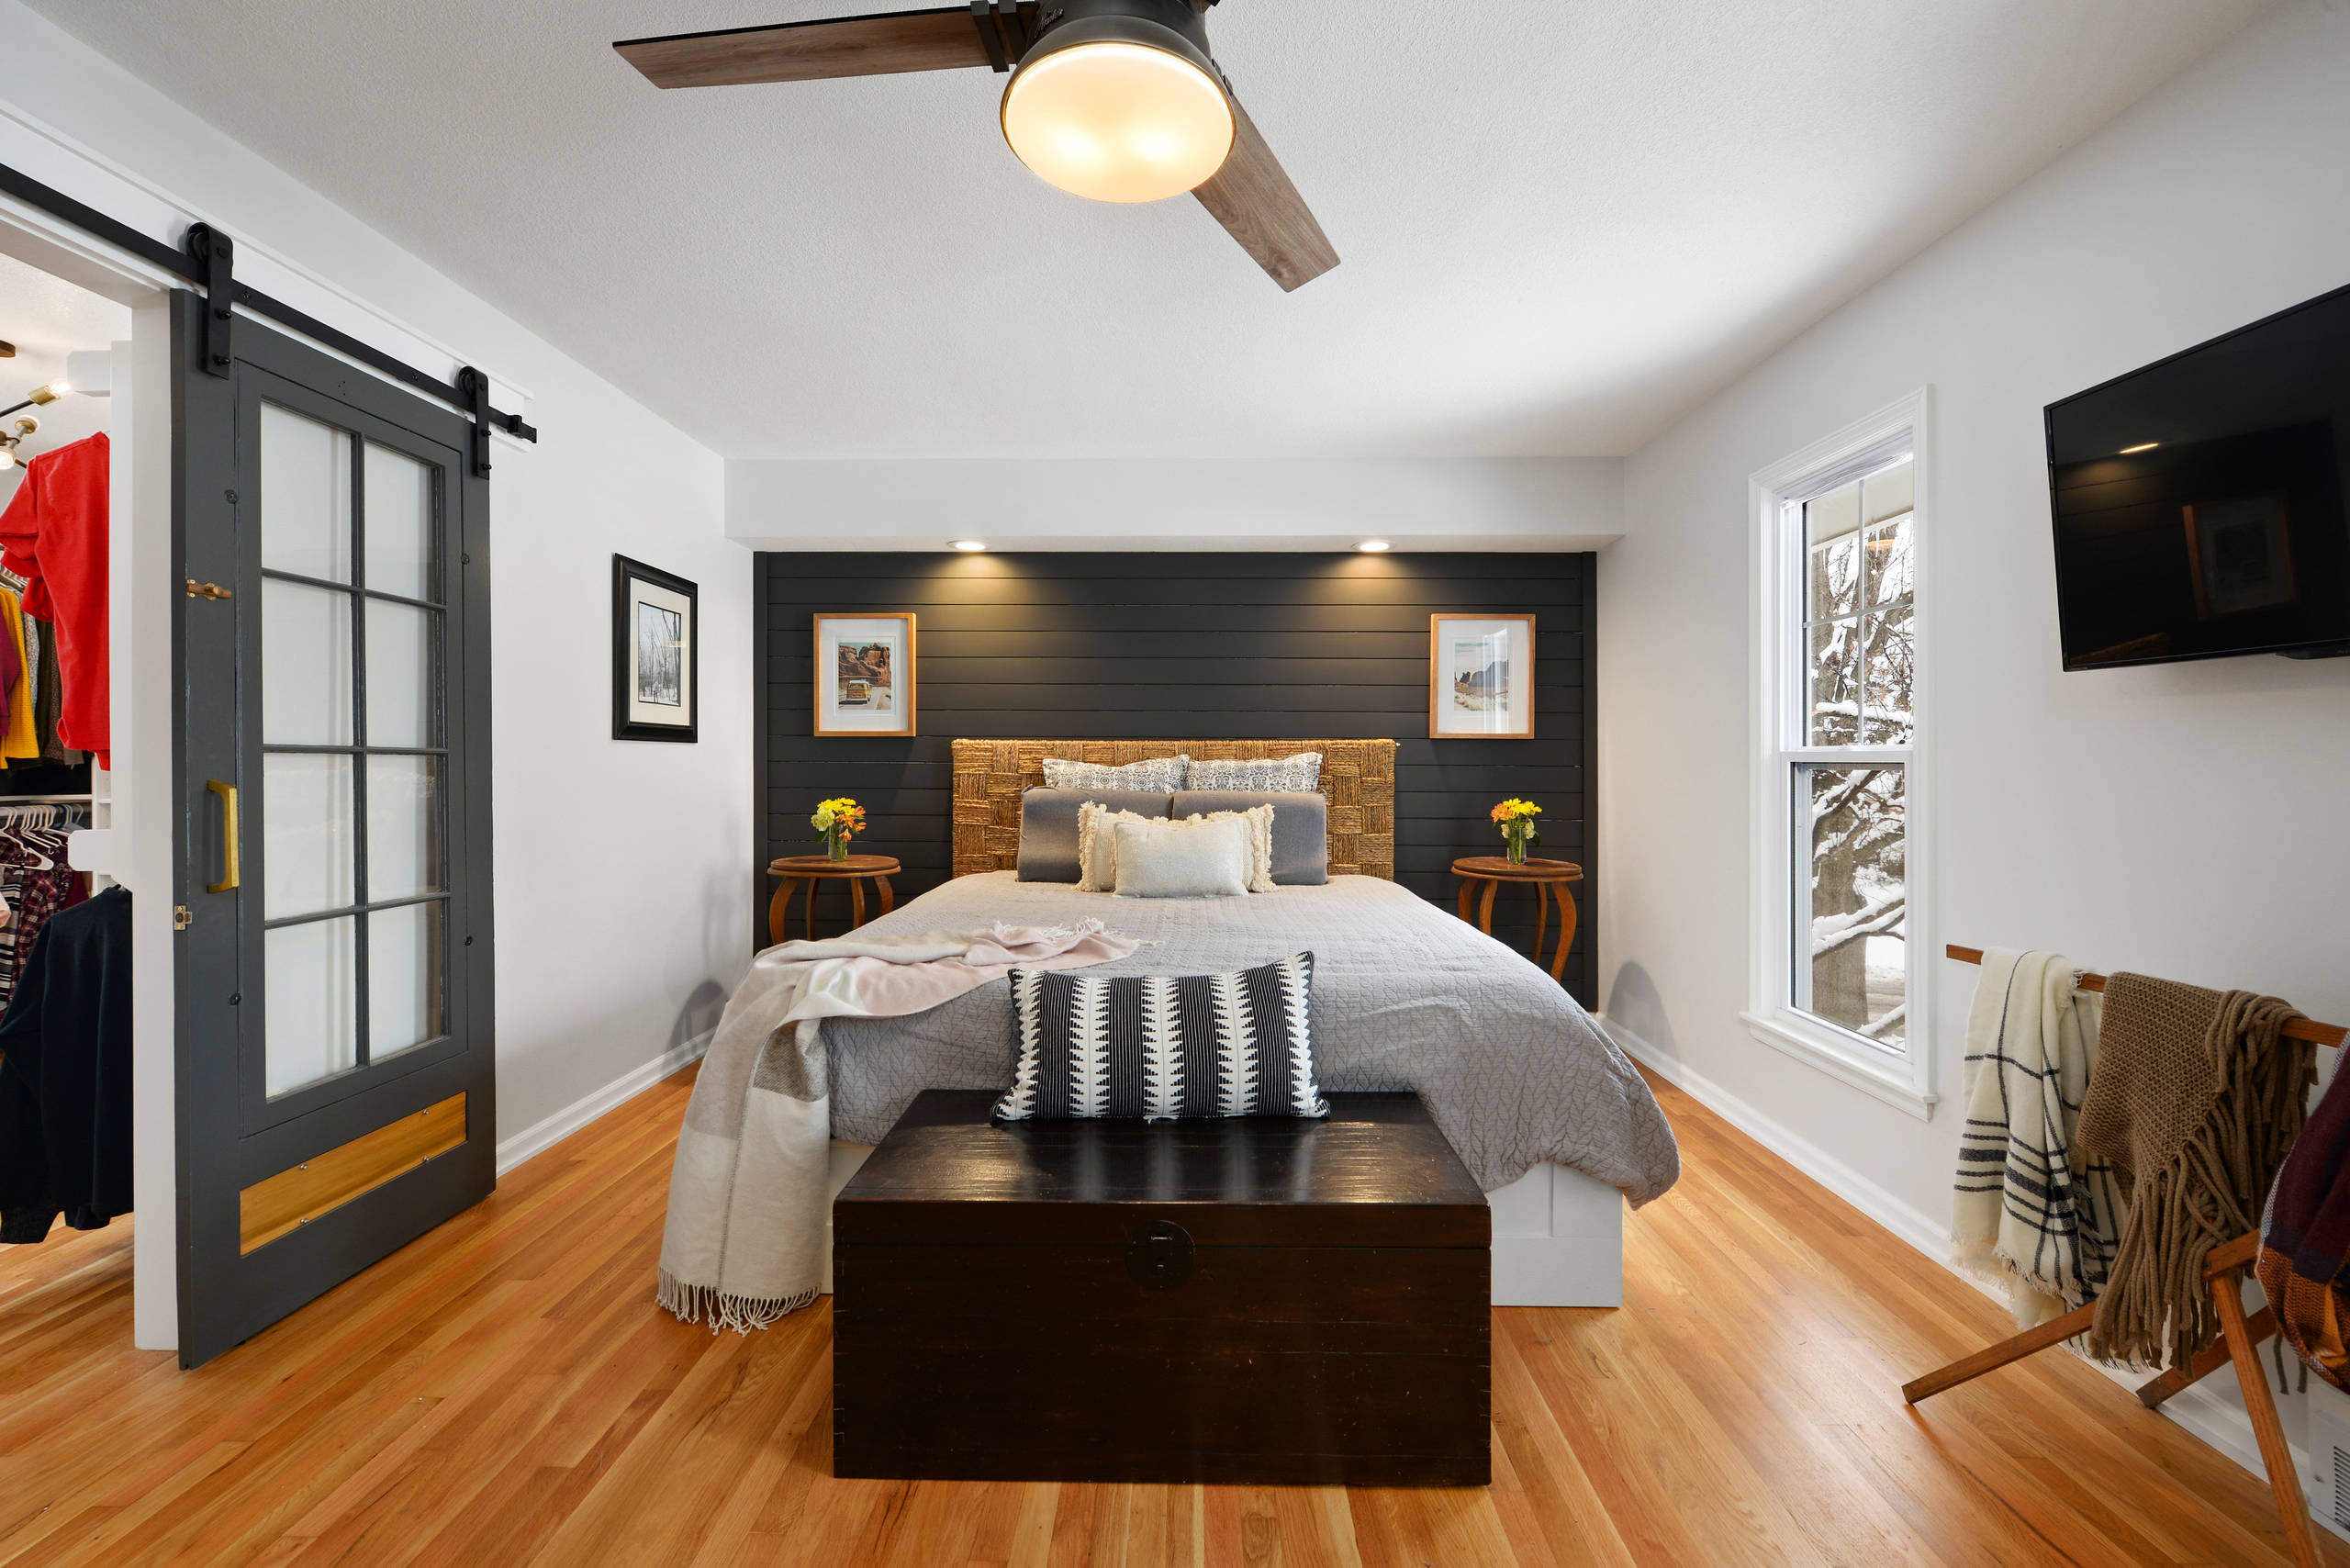 75 Beautiful Small Bedroom Pictures Ideas November 2020 Houzz